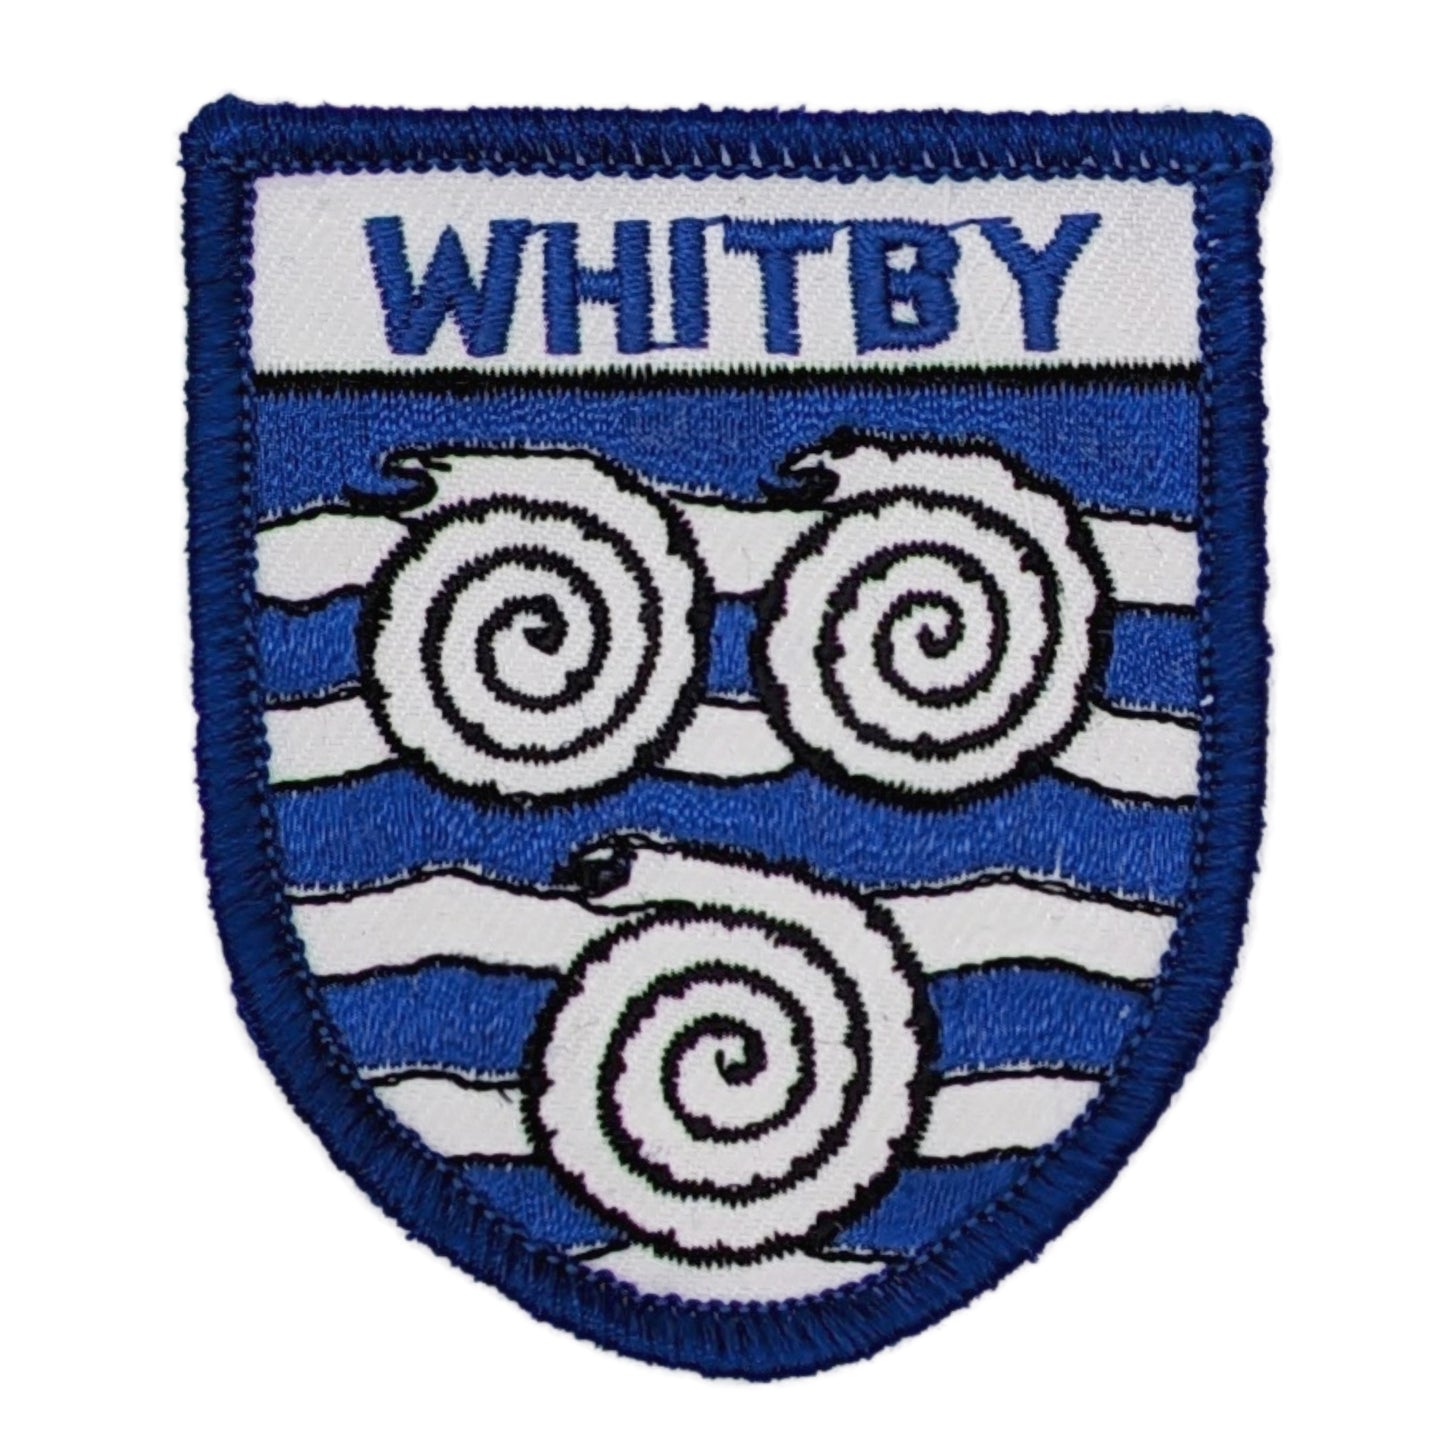 Whitby Coat of Arms Embroidered Patch Badge - The Great Yorkshire Shop